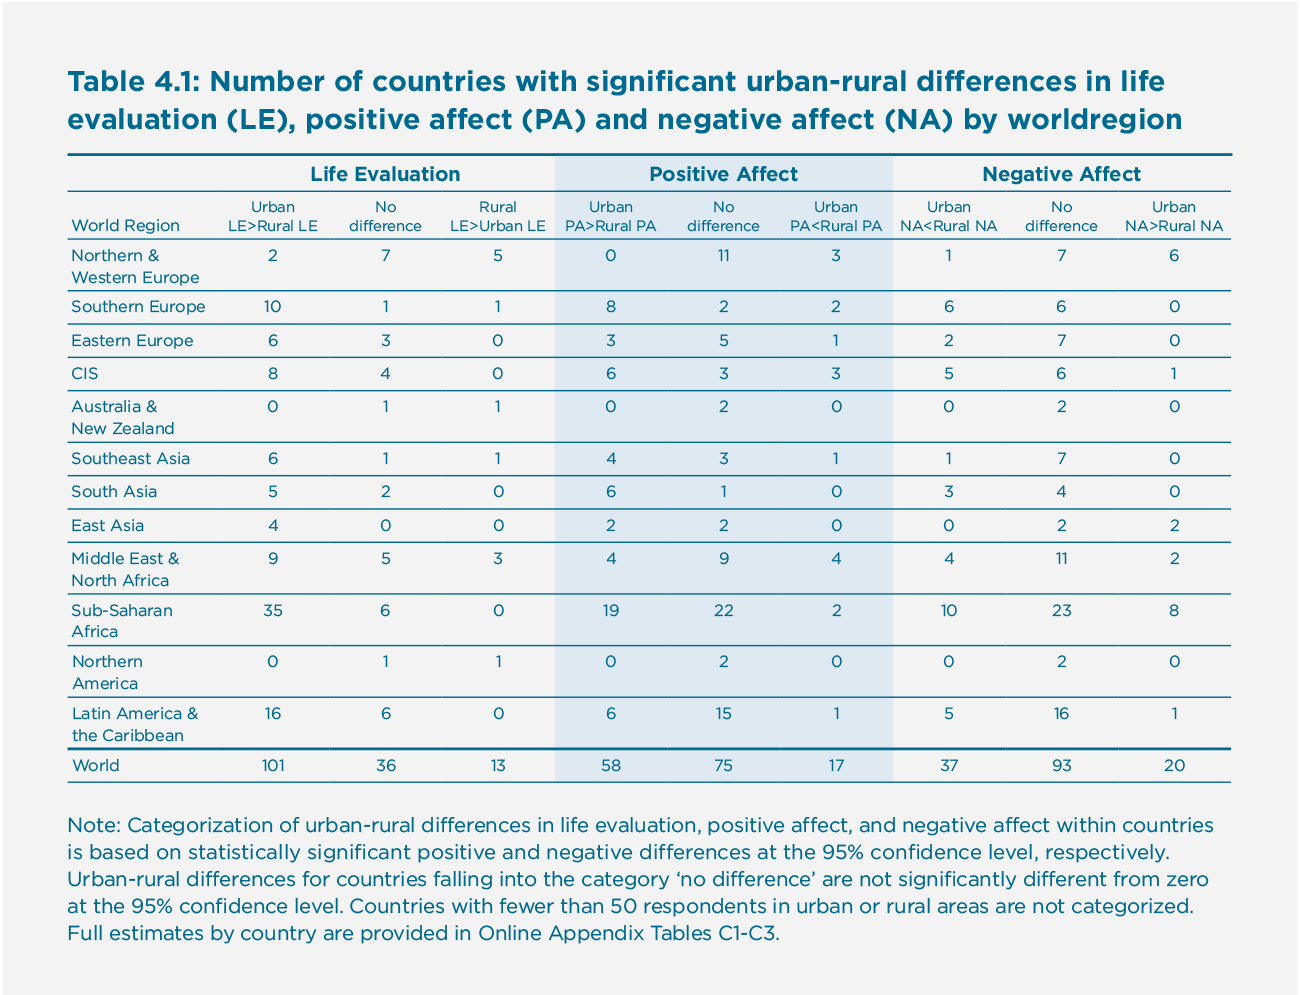 Table 4.1: Number of countries with significant urban-rural differences in life evaluation (LE), positive affect (PA) and negative affect (NA) by worldregion